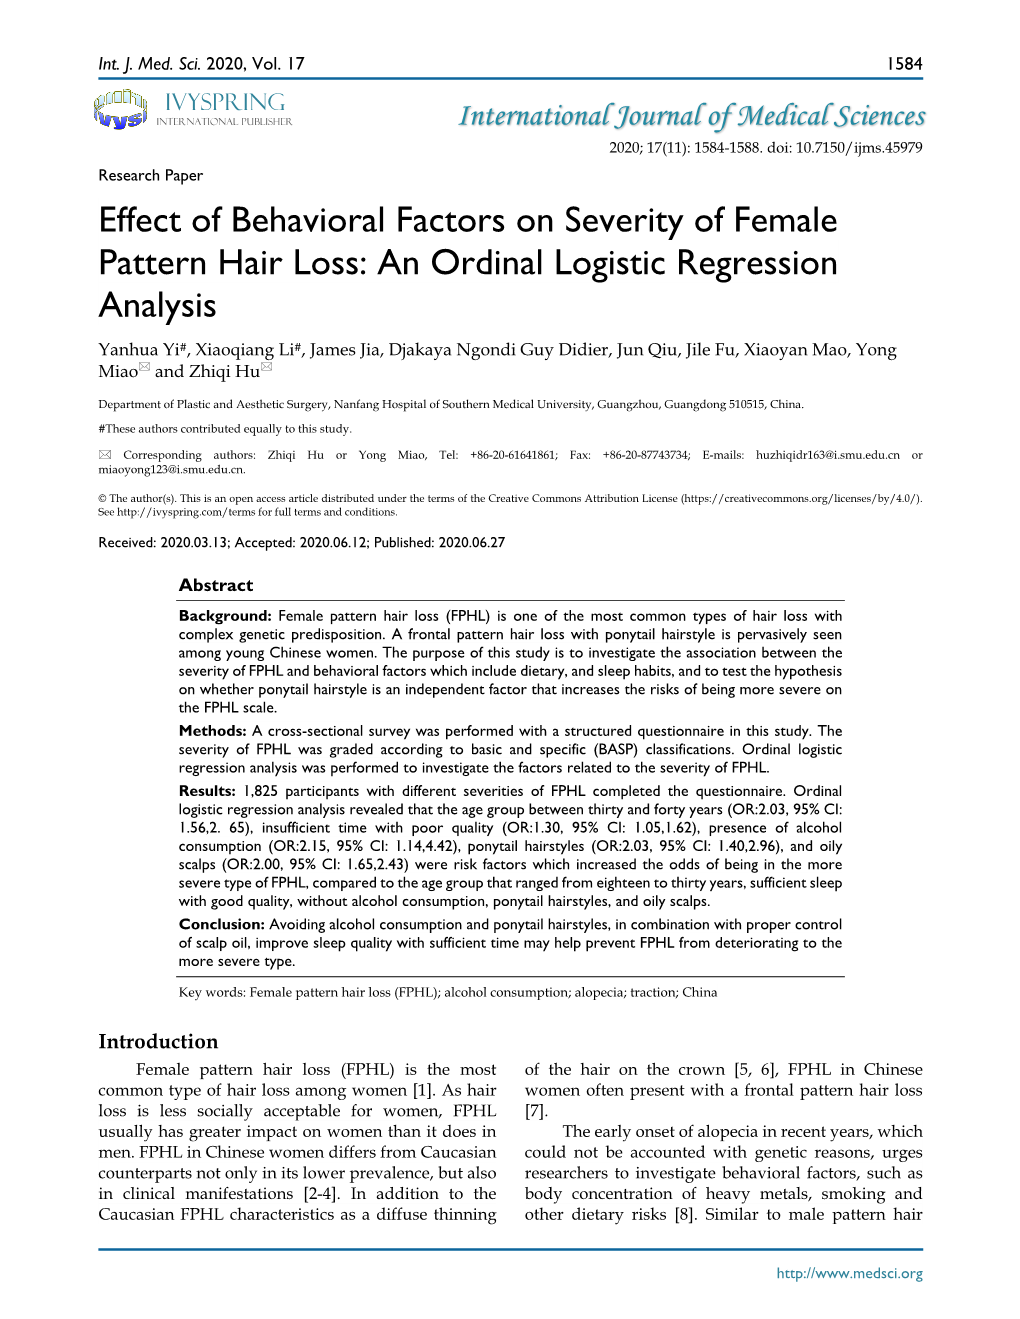 Effect of Behavioral Factors on Severity of Female Pattern Hair Loss